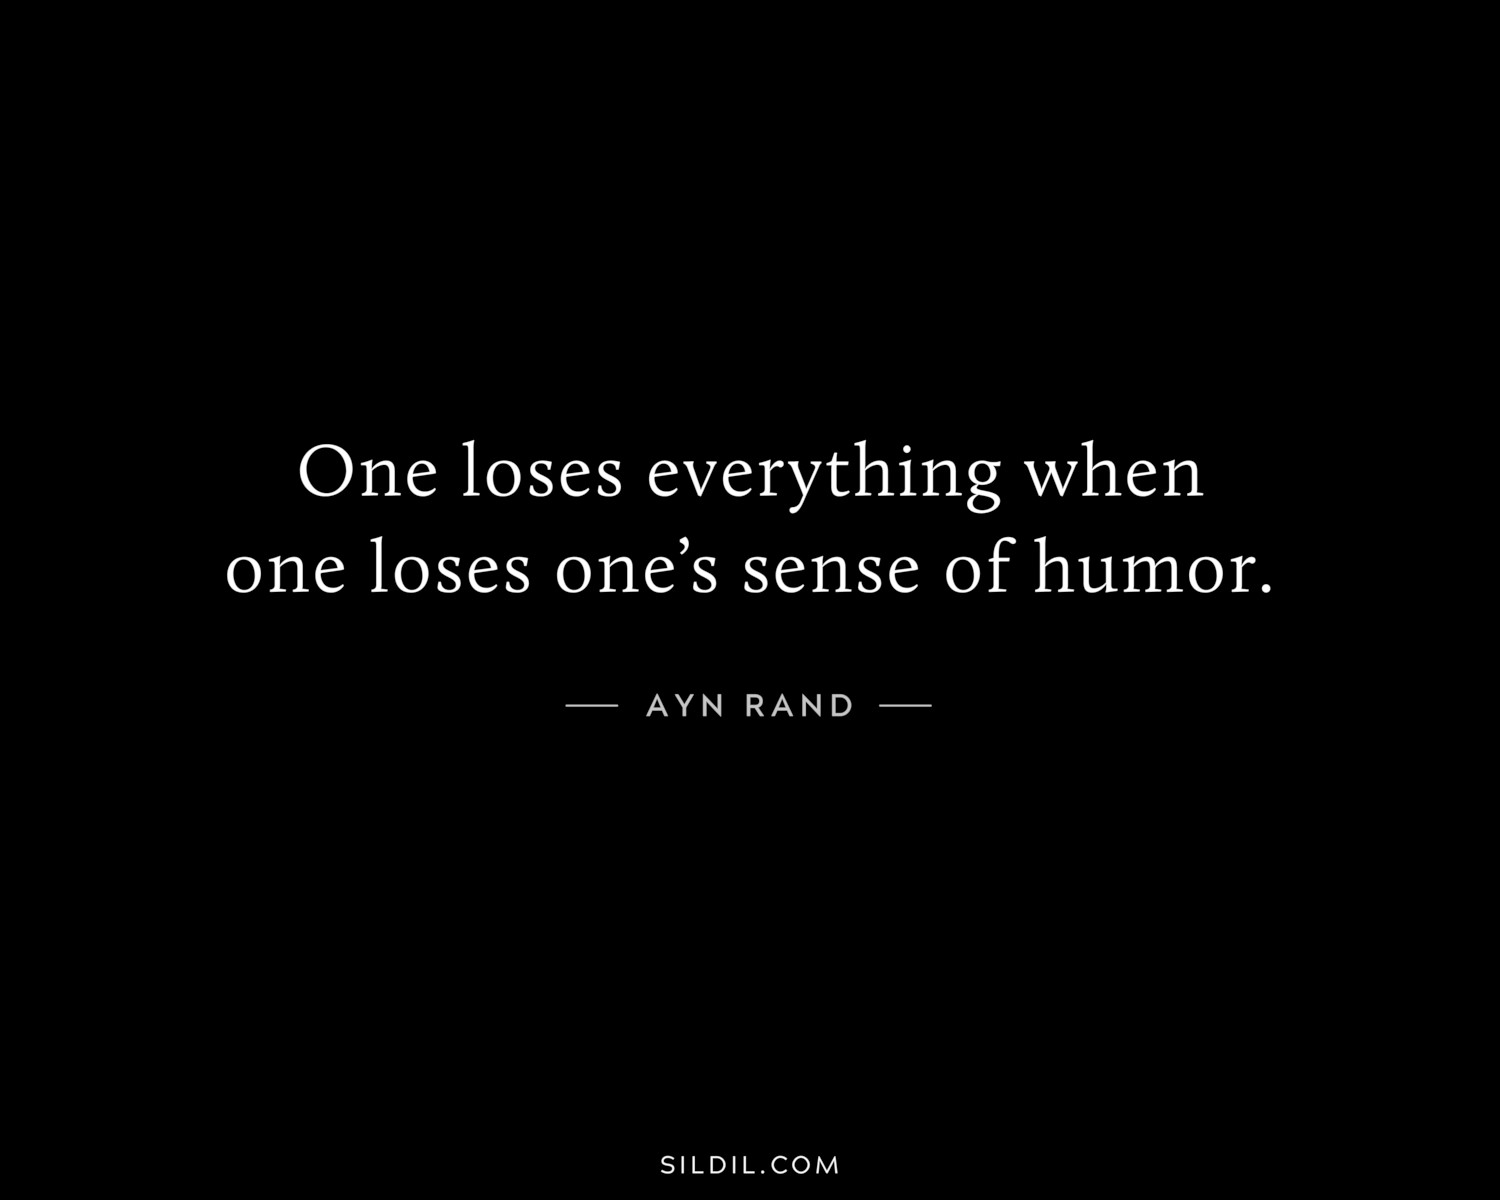 One loses everything when one loses one’s sense of humor.